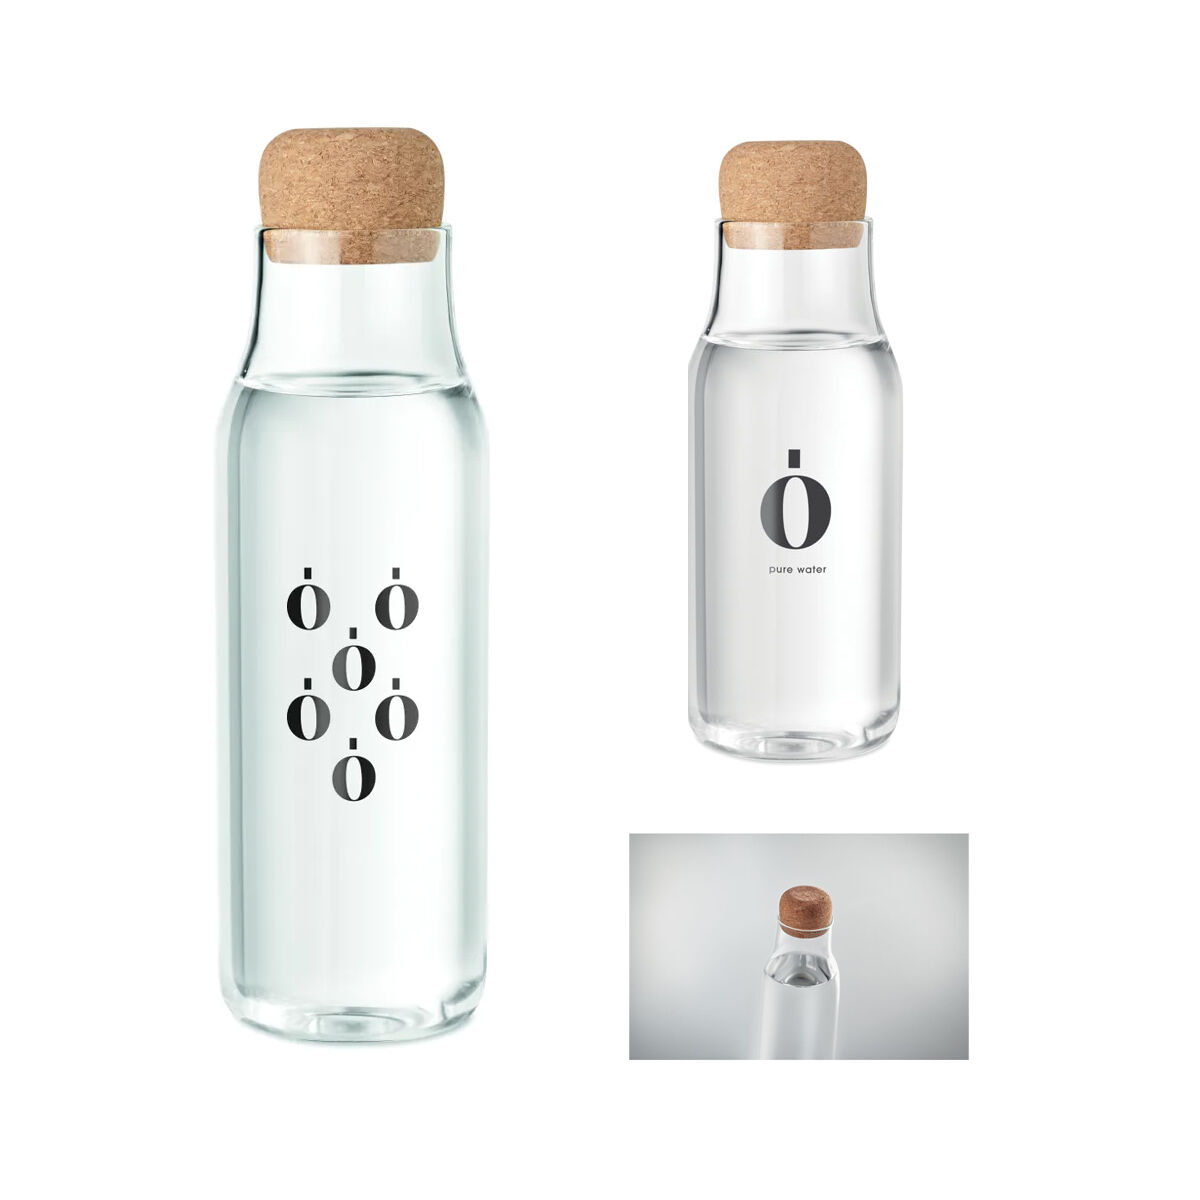 Glass Decanter water bottle with a cork lid